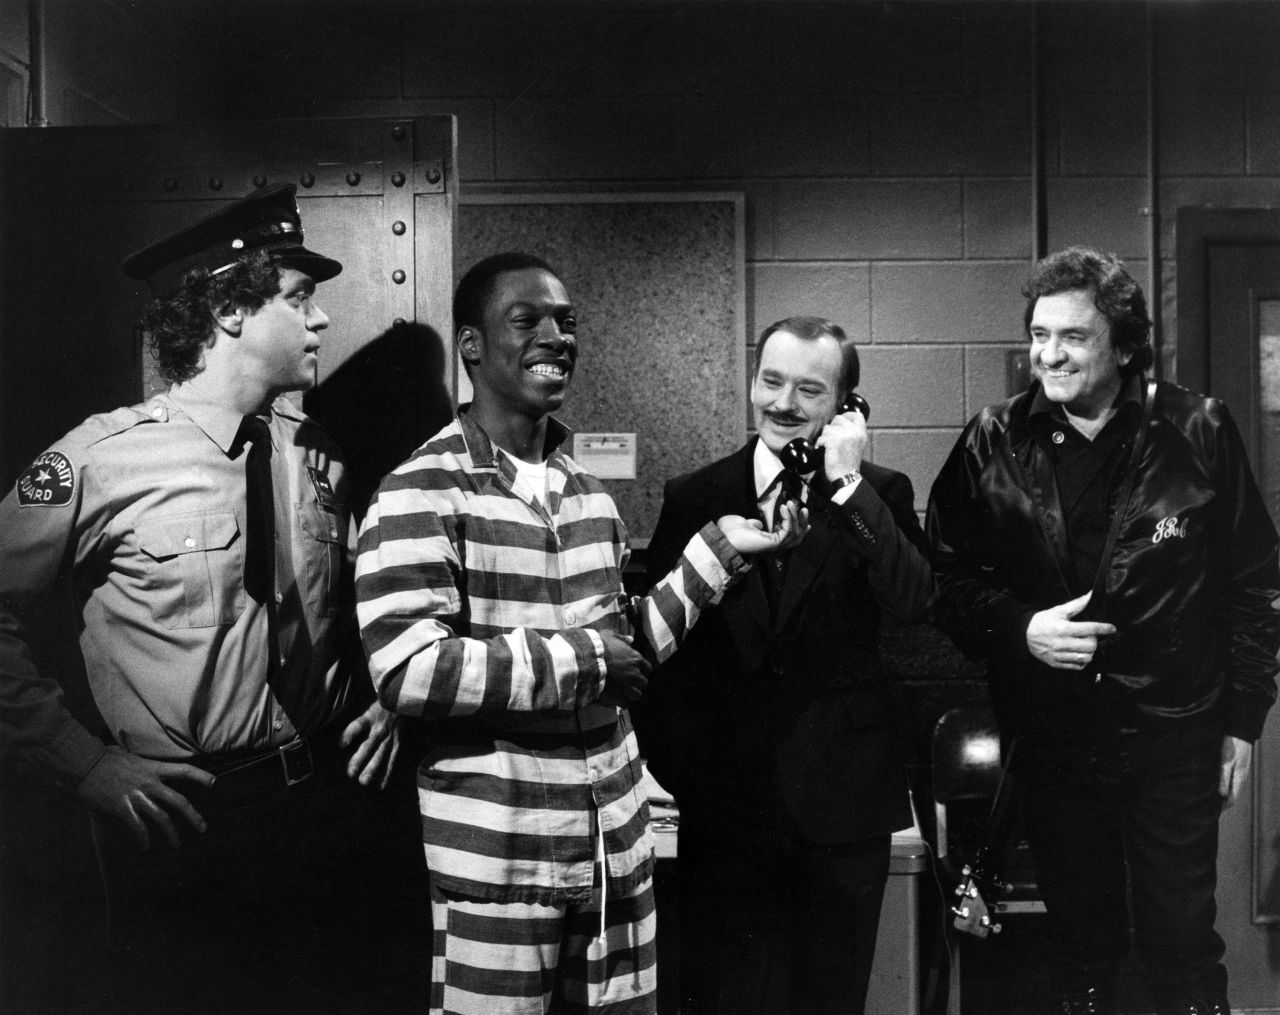 Joe Piscopo, from left, Eddie Murphy, Brian Doyle-Murray, and Johnny Cash perform a "Saturday Night Live" skit on April 17, 1982.